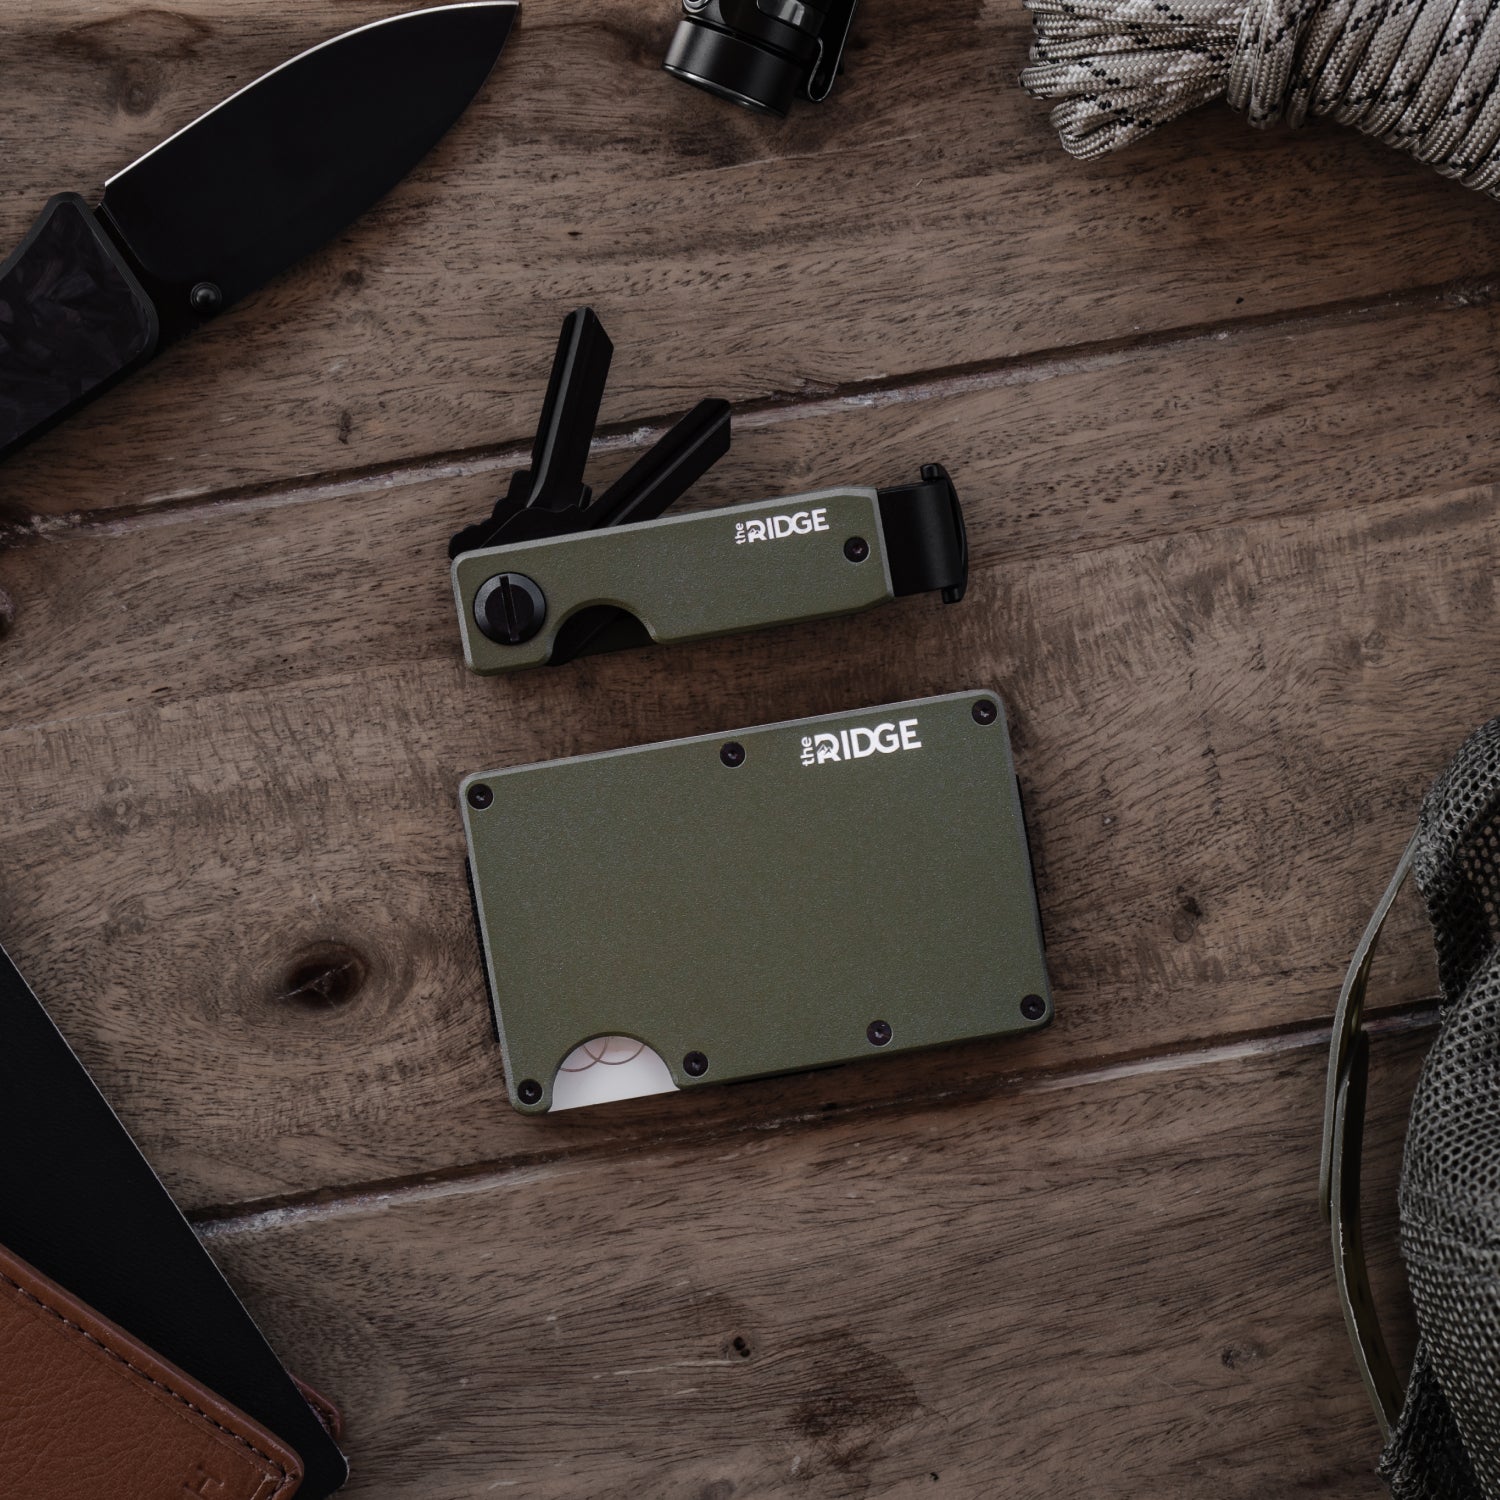 The Ridge Wallet Makes Carrying Your Cards Safe And Light!